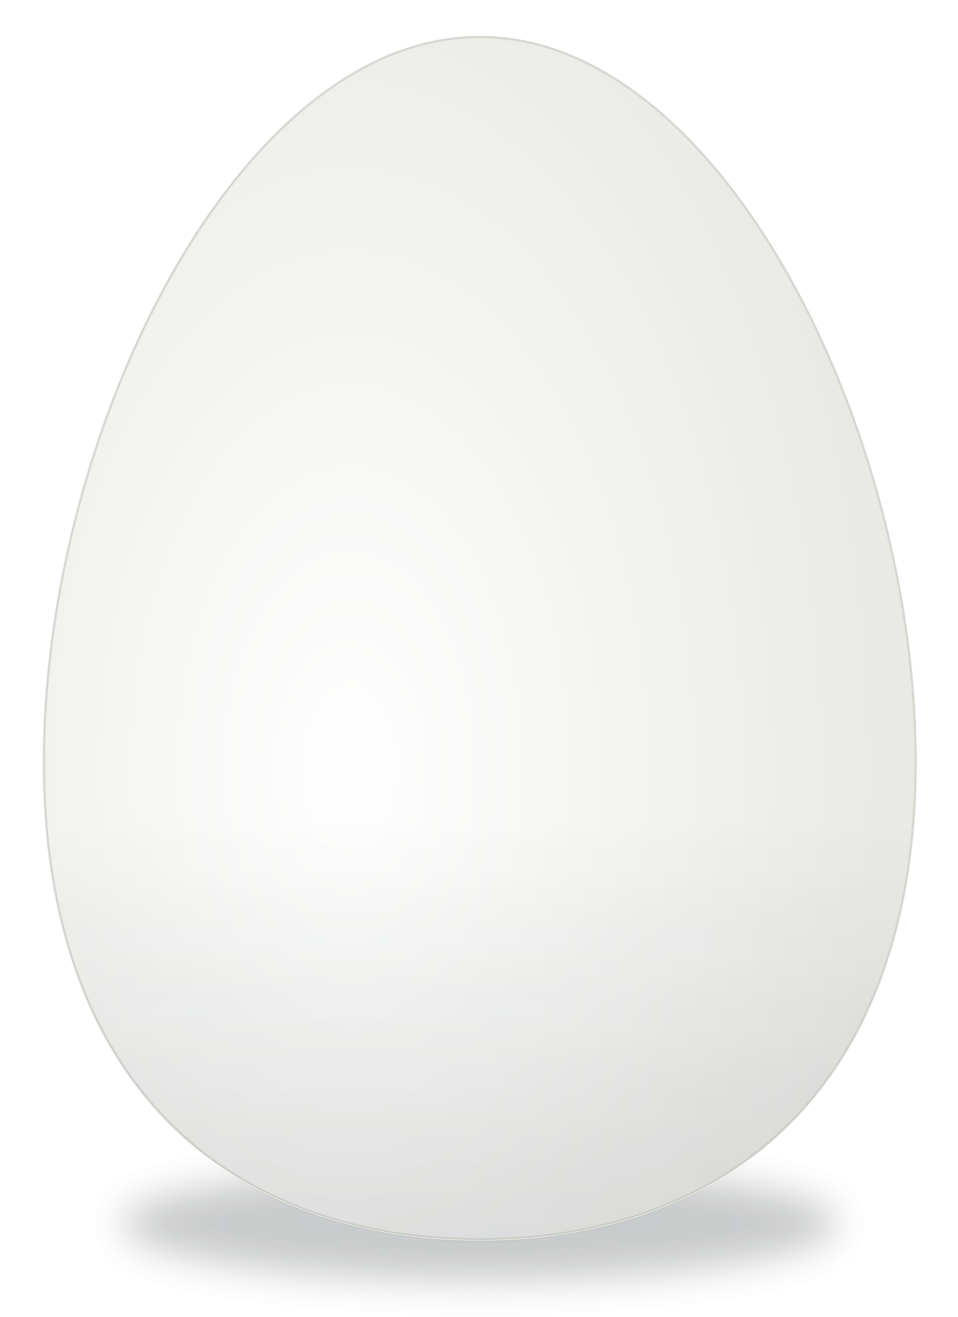 Pngegg PNG Clipart